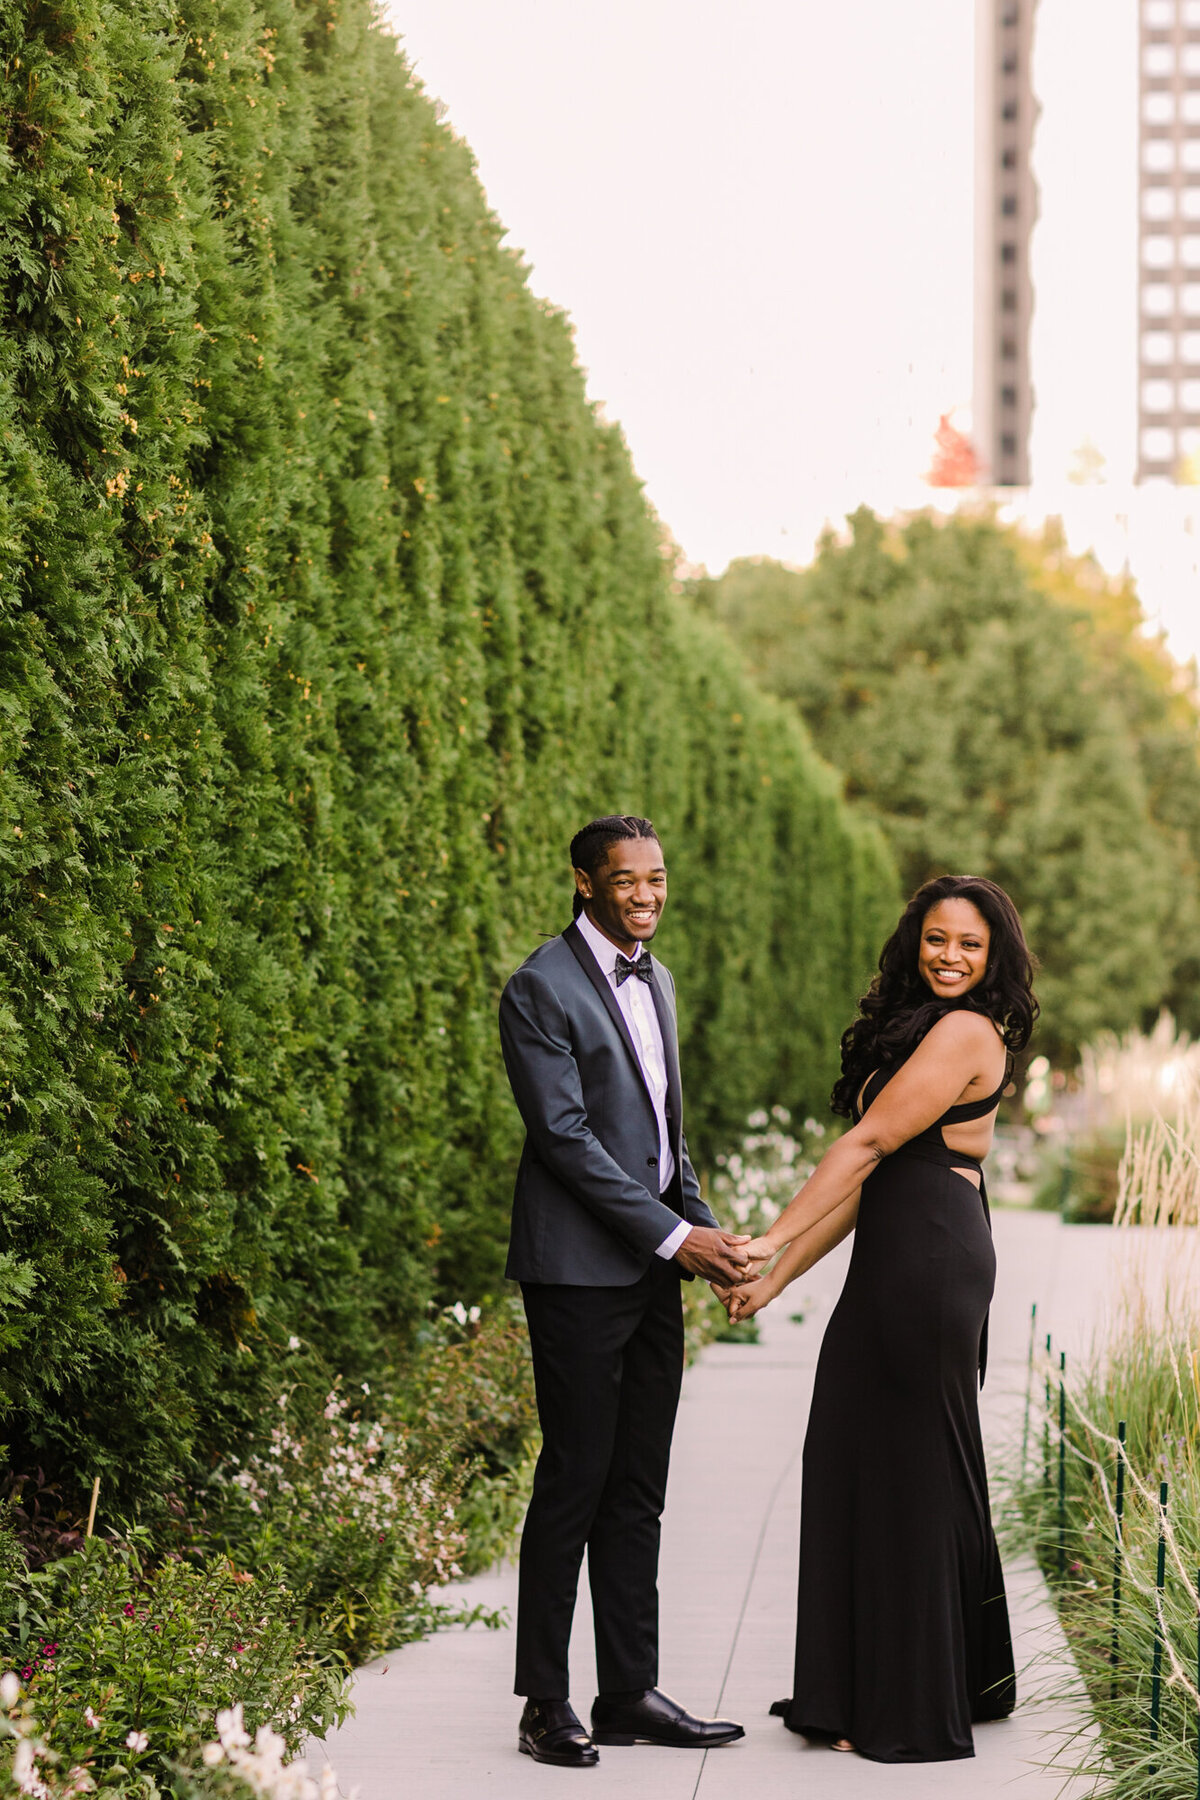 A summery Chicago engagement session